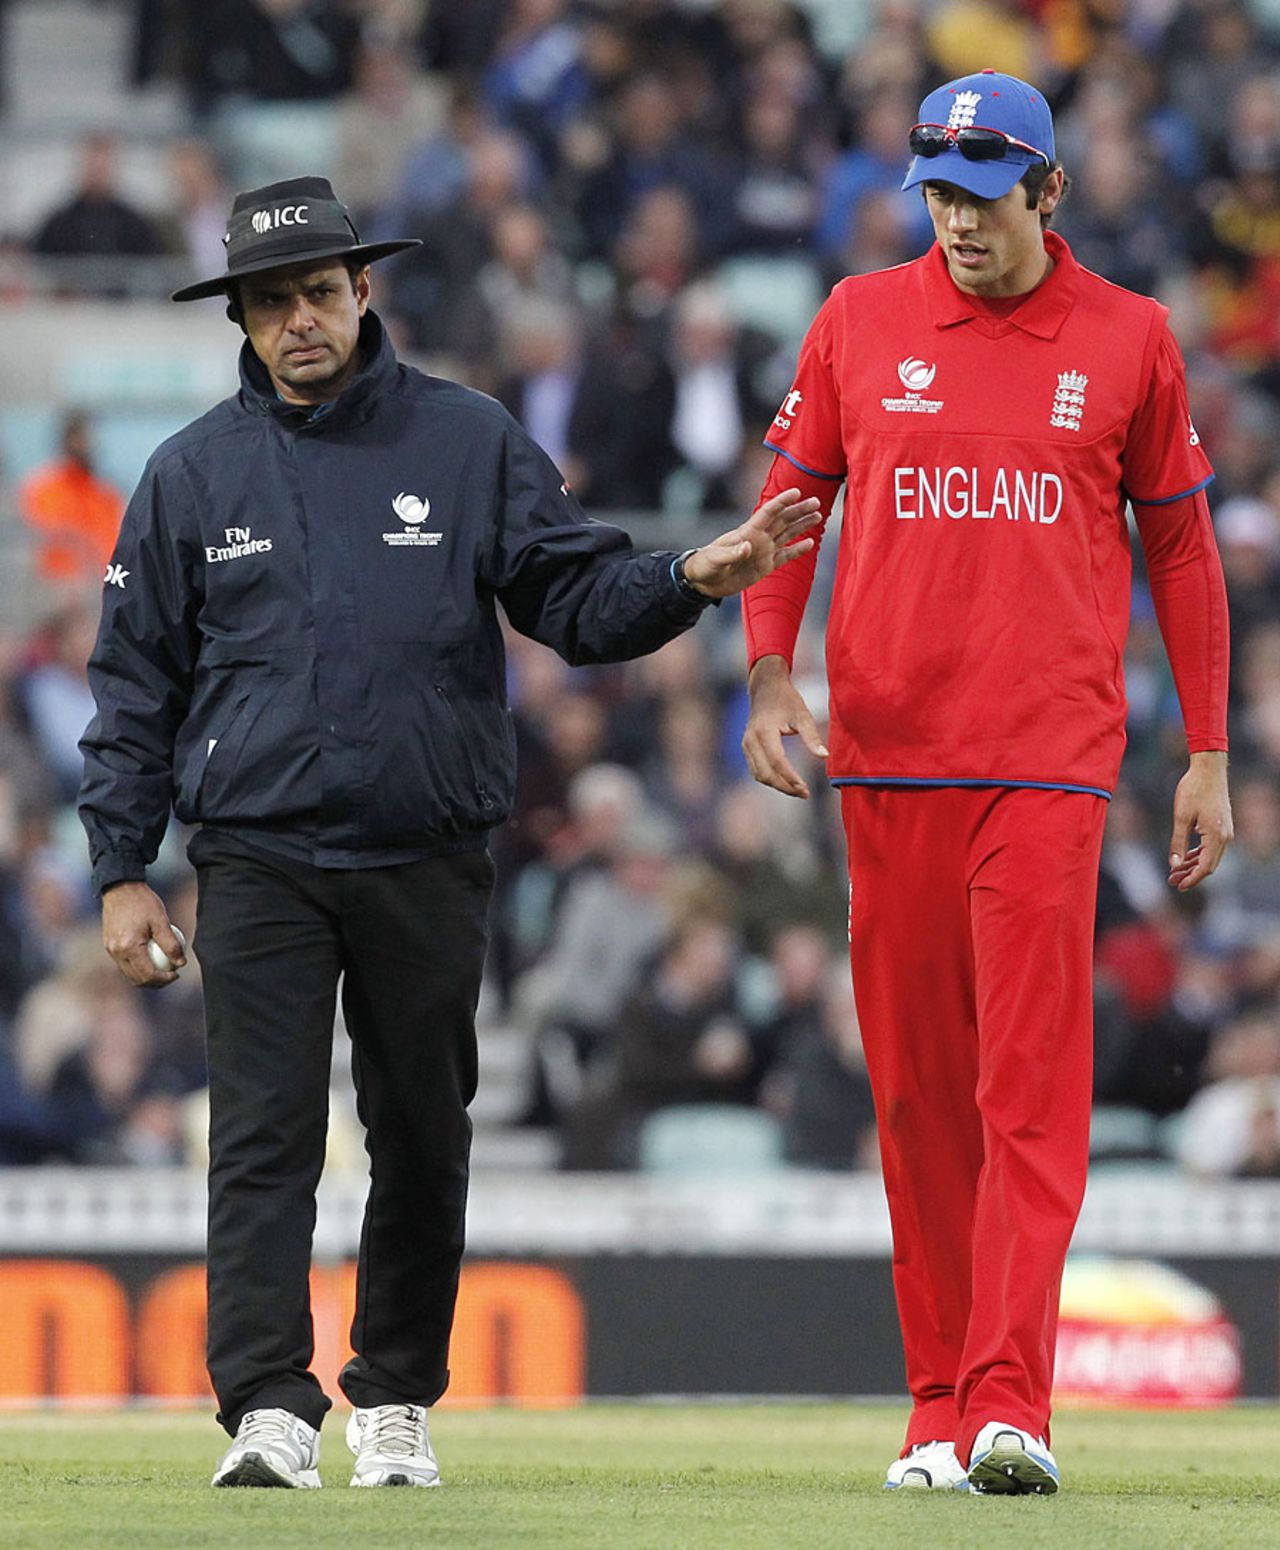 Aleem Dar was not happy with the ball, England v Sri Lanka, Champions Trophy, The Oval, June 13, 2013